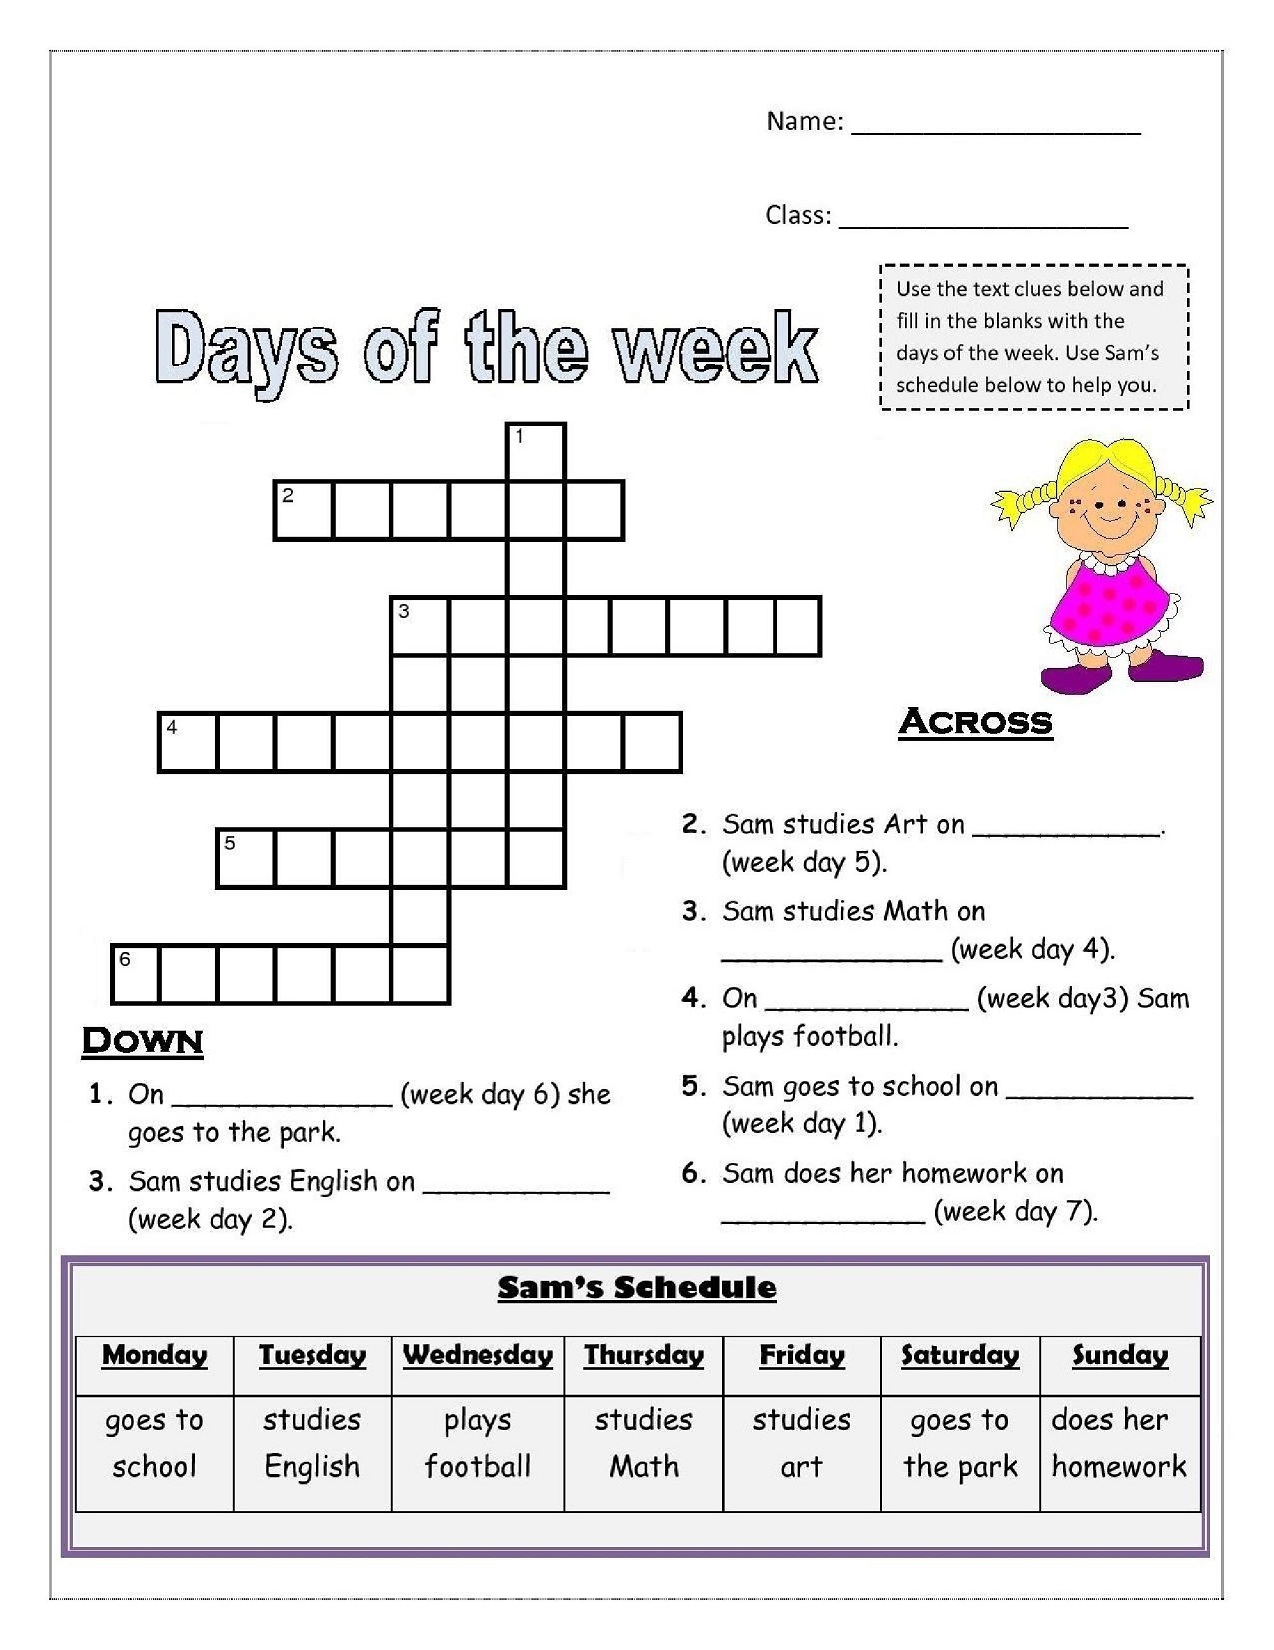 Days of the Week Worksheets for Kids